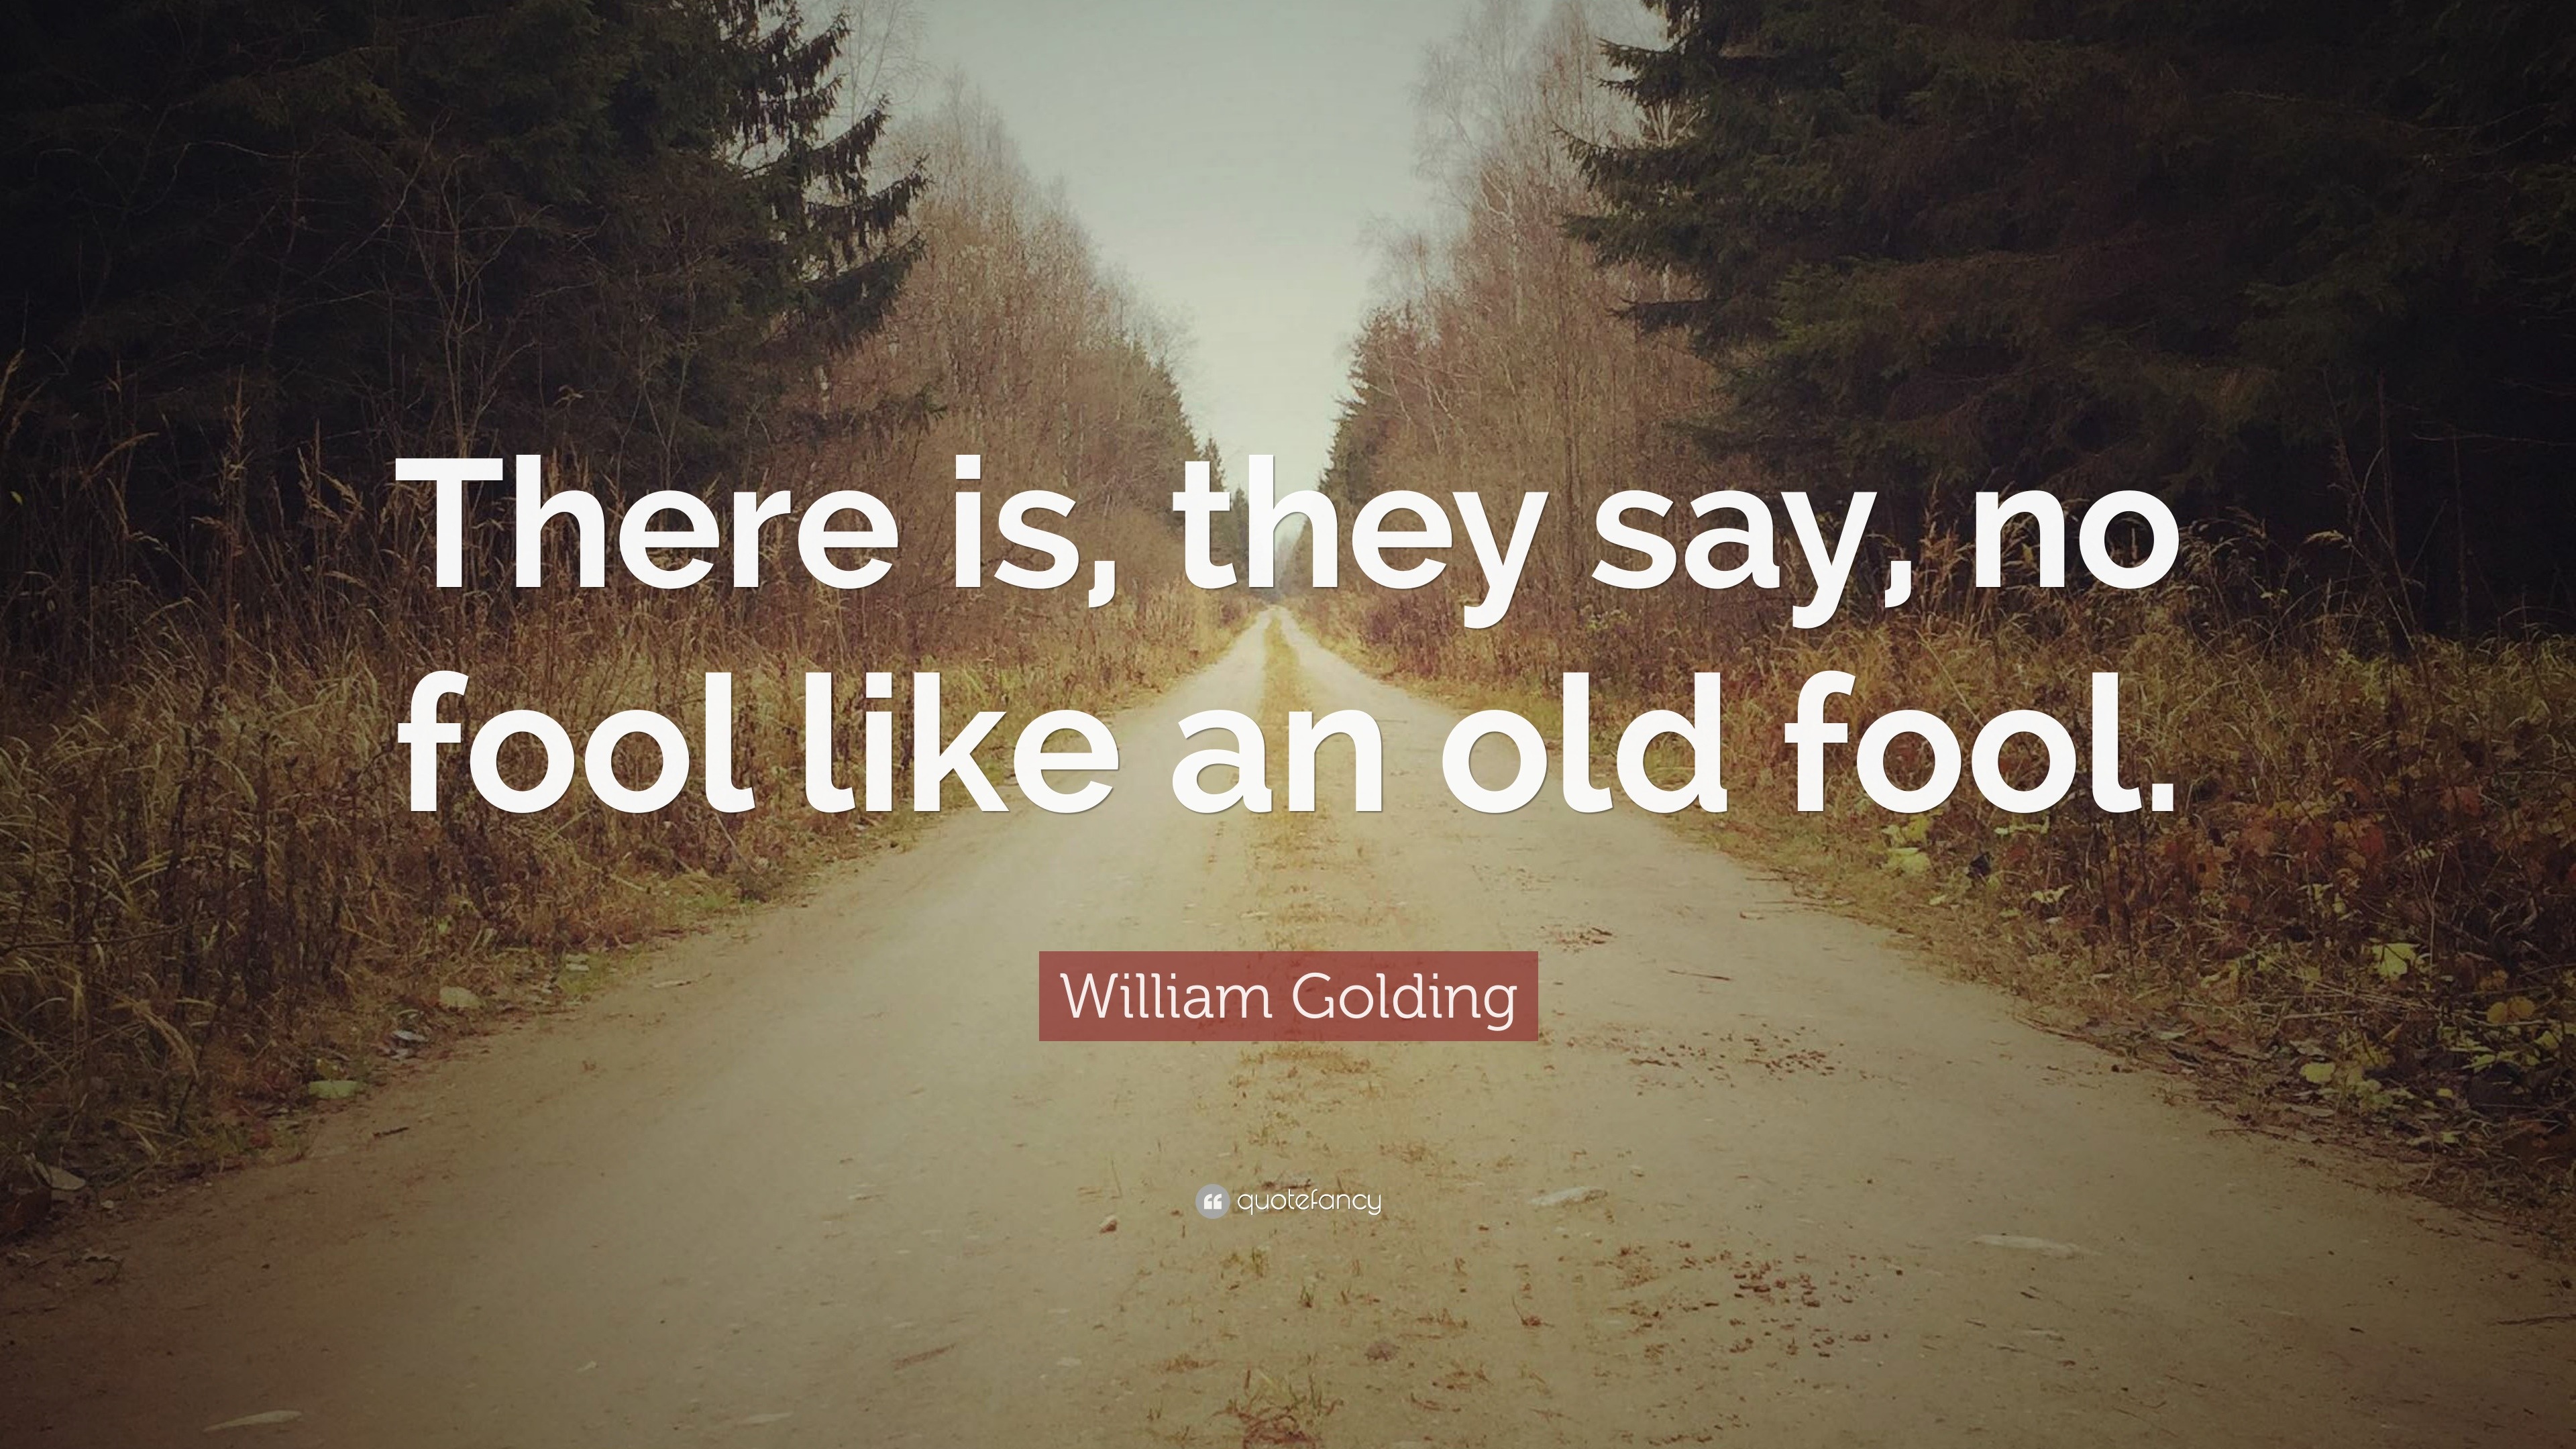 William Golding Quote: “There is, they say, no fool like an old fool